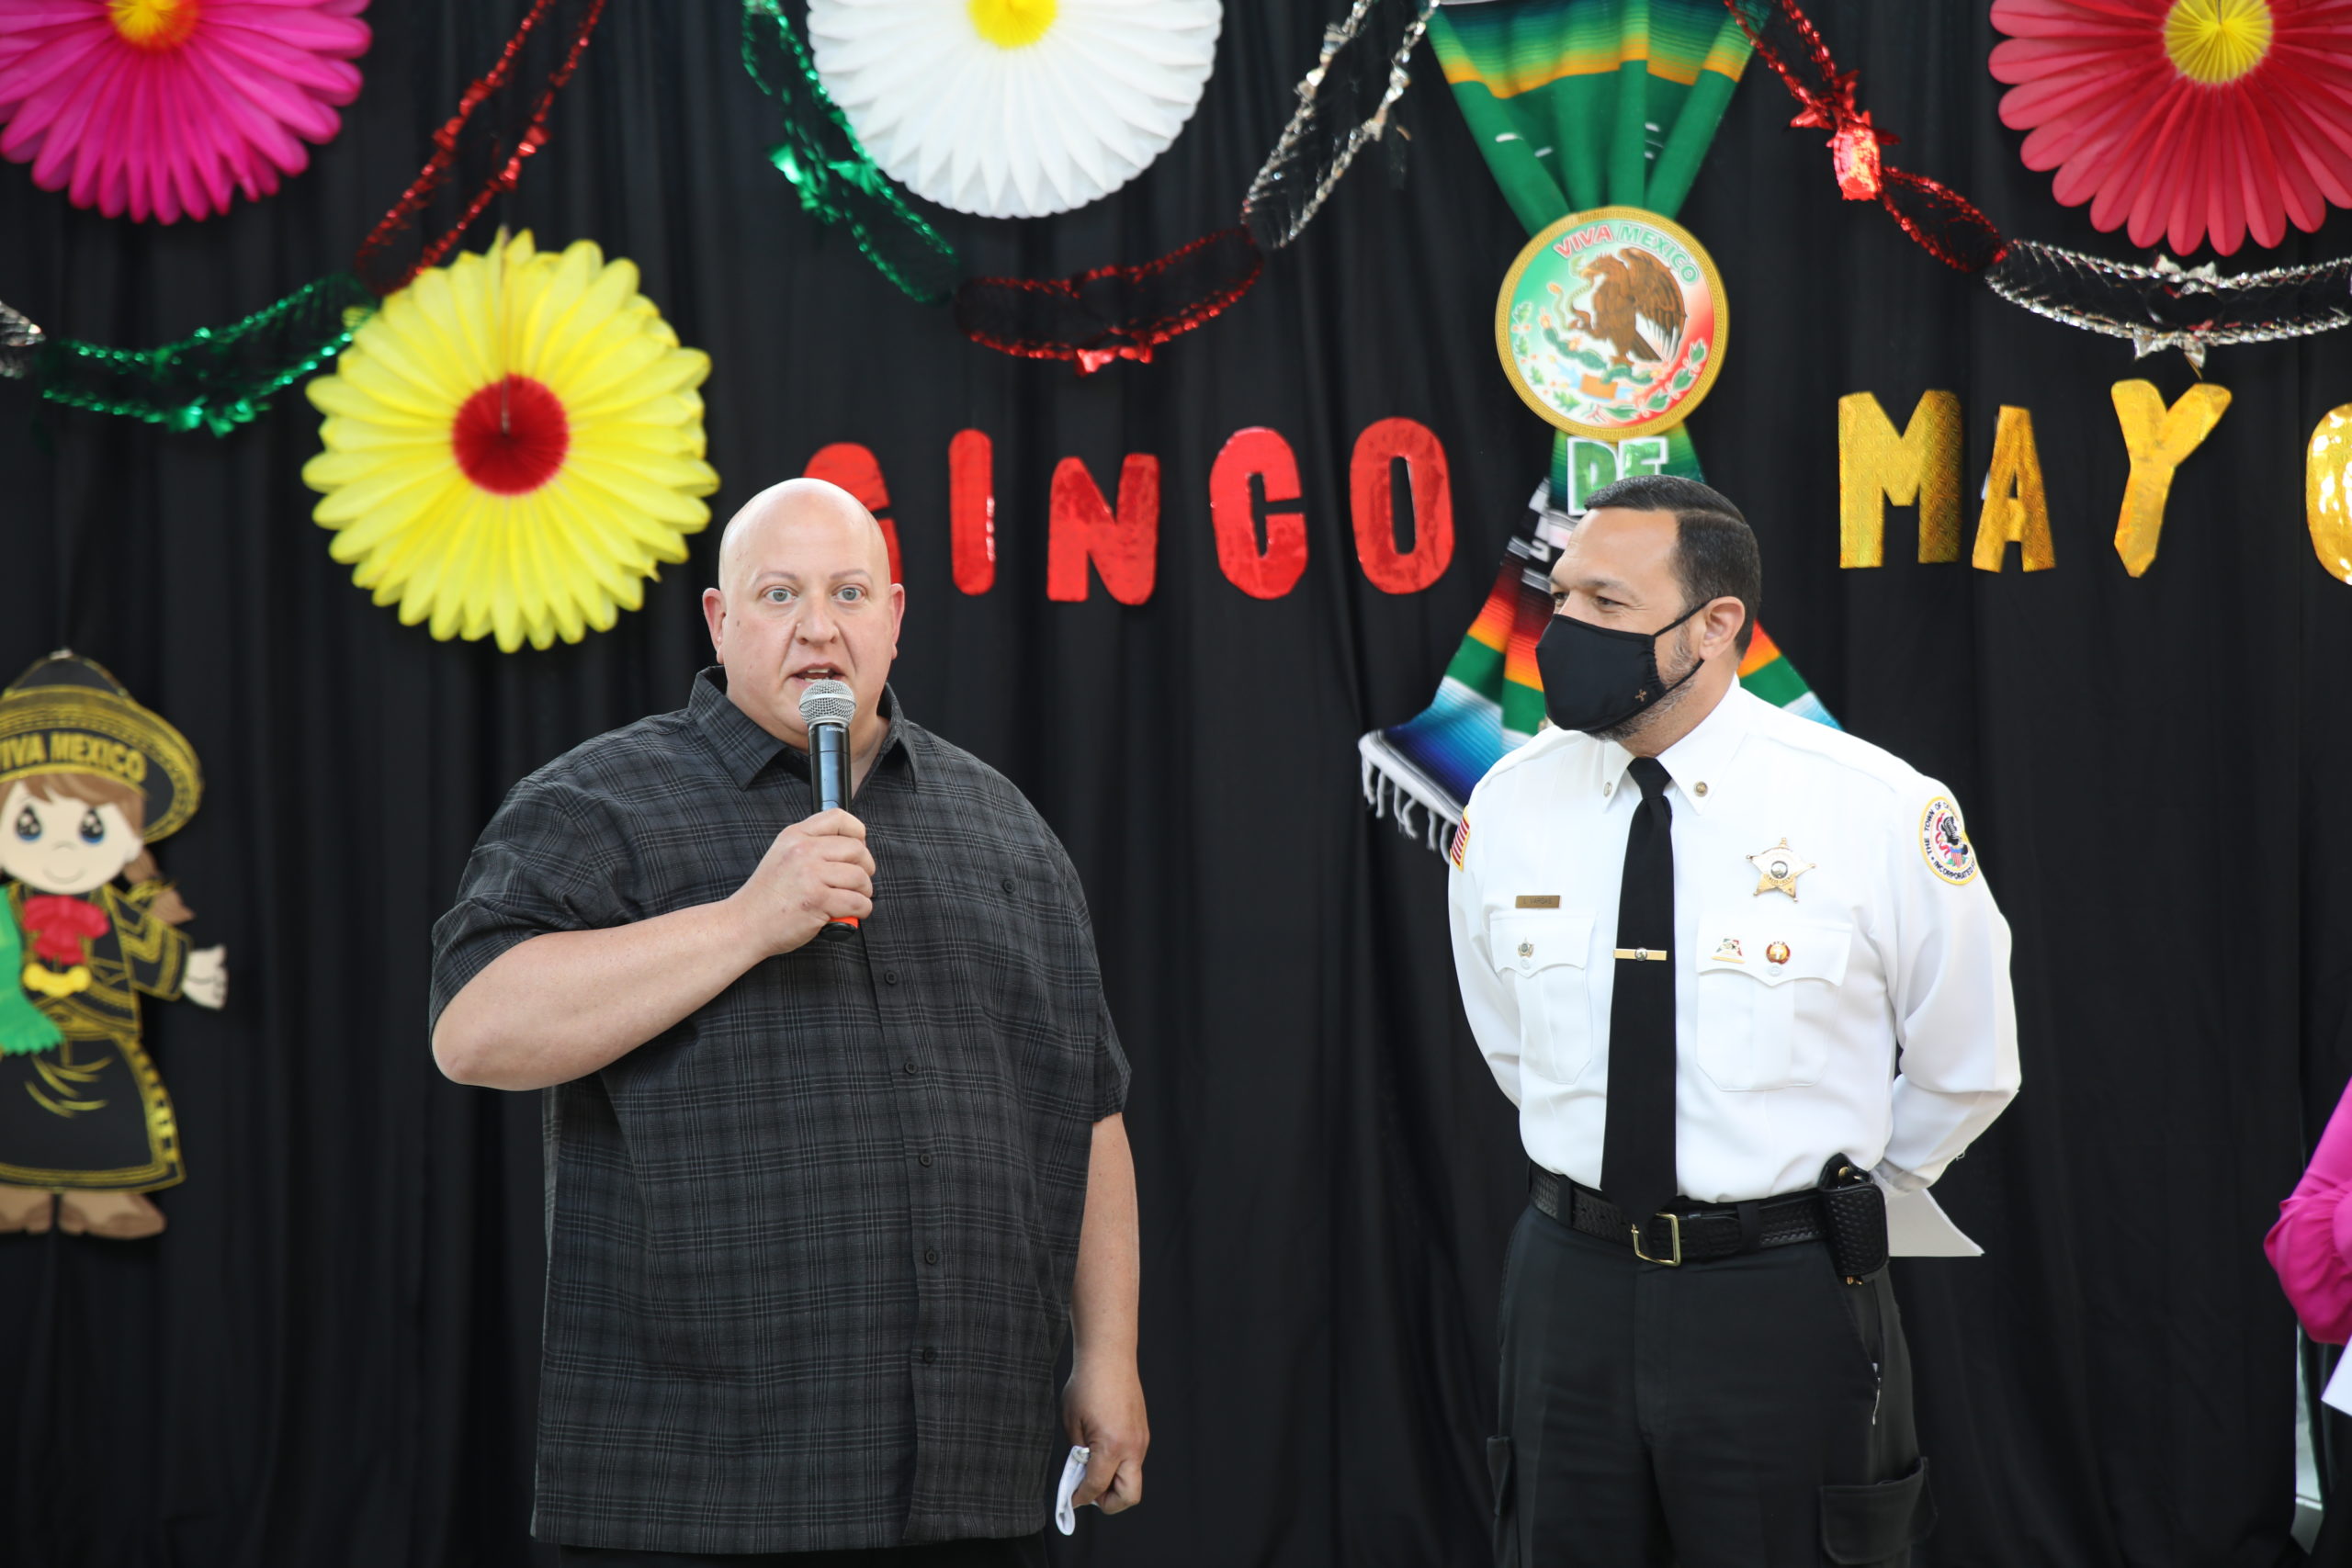 Cicero Assessor Emilio “Emo” Cundari and emcee Ismael Vargas, director of the Cicero Clergy Committee and Director of the Business License Department. Cinco de Mayo 2021